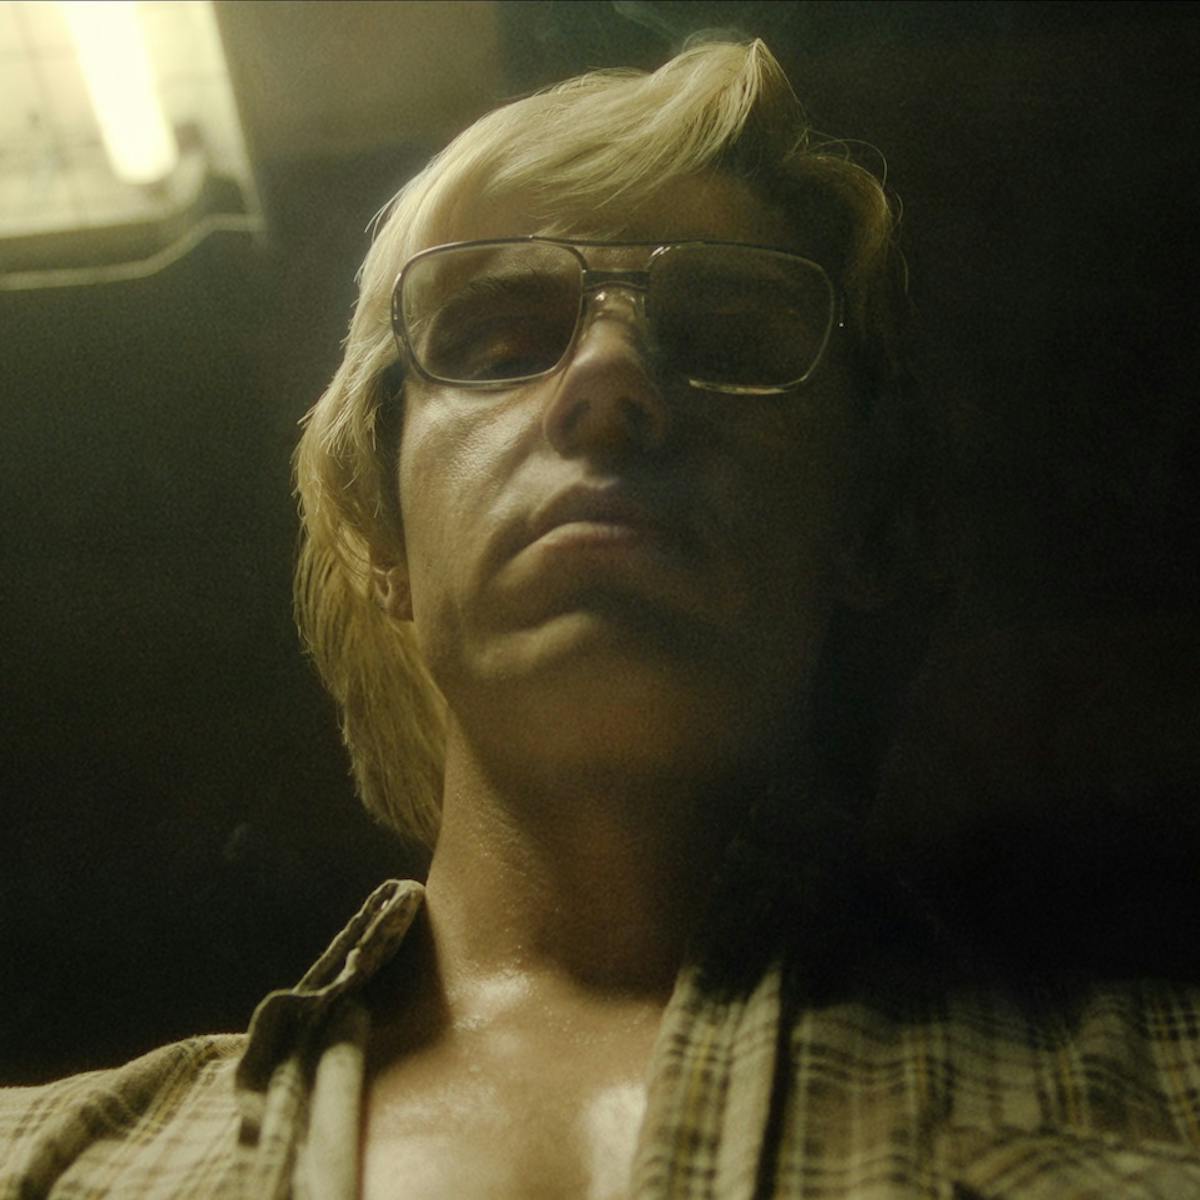 Jeffrey Dahmer (Evan Peters) is sweaty and looks menacing. His face is lit by a yellow light.